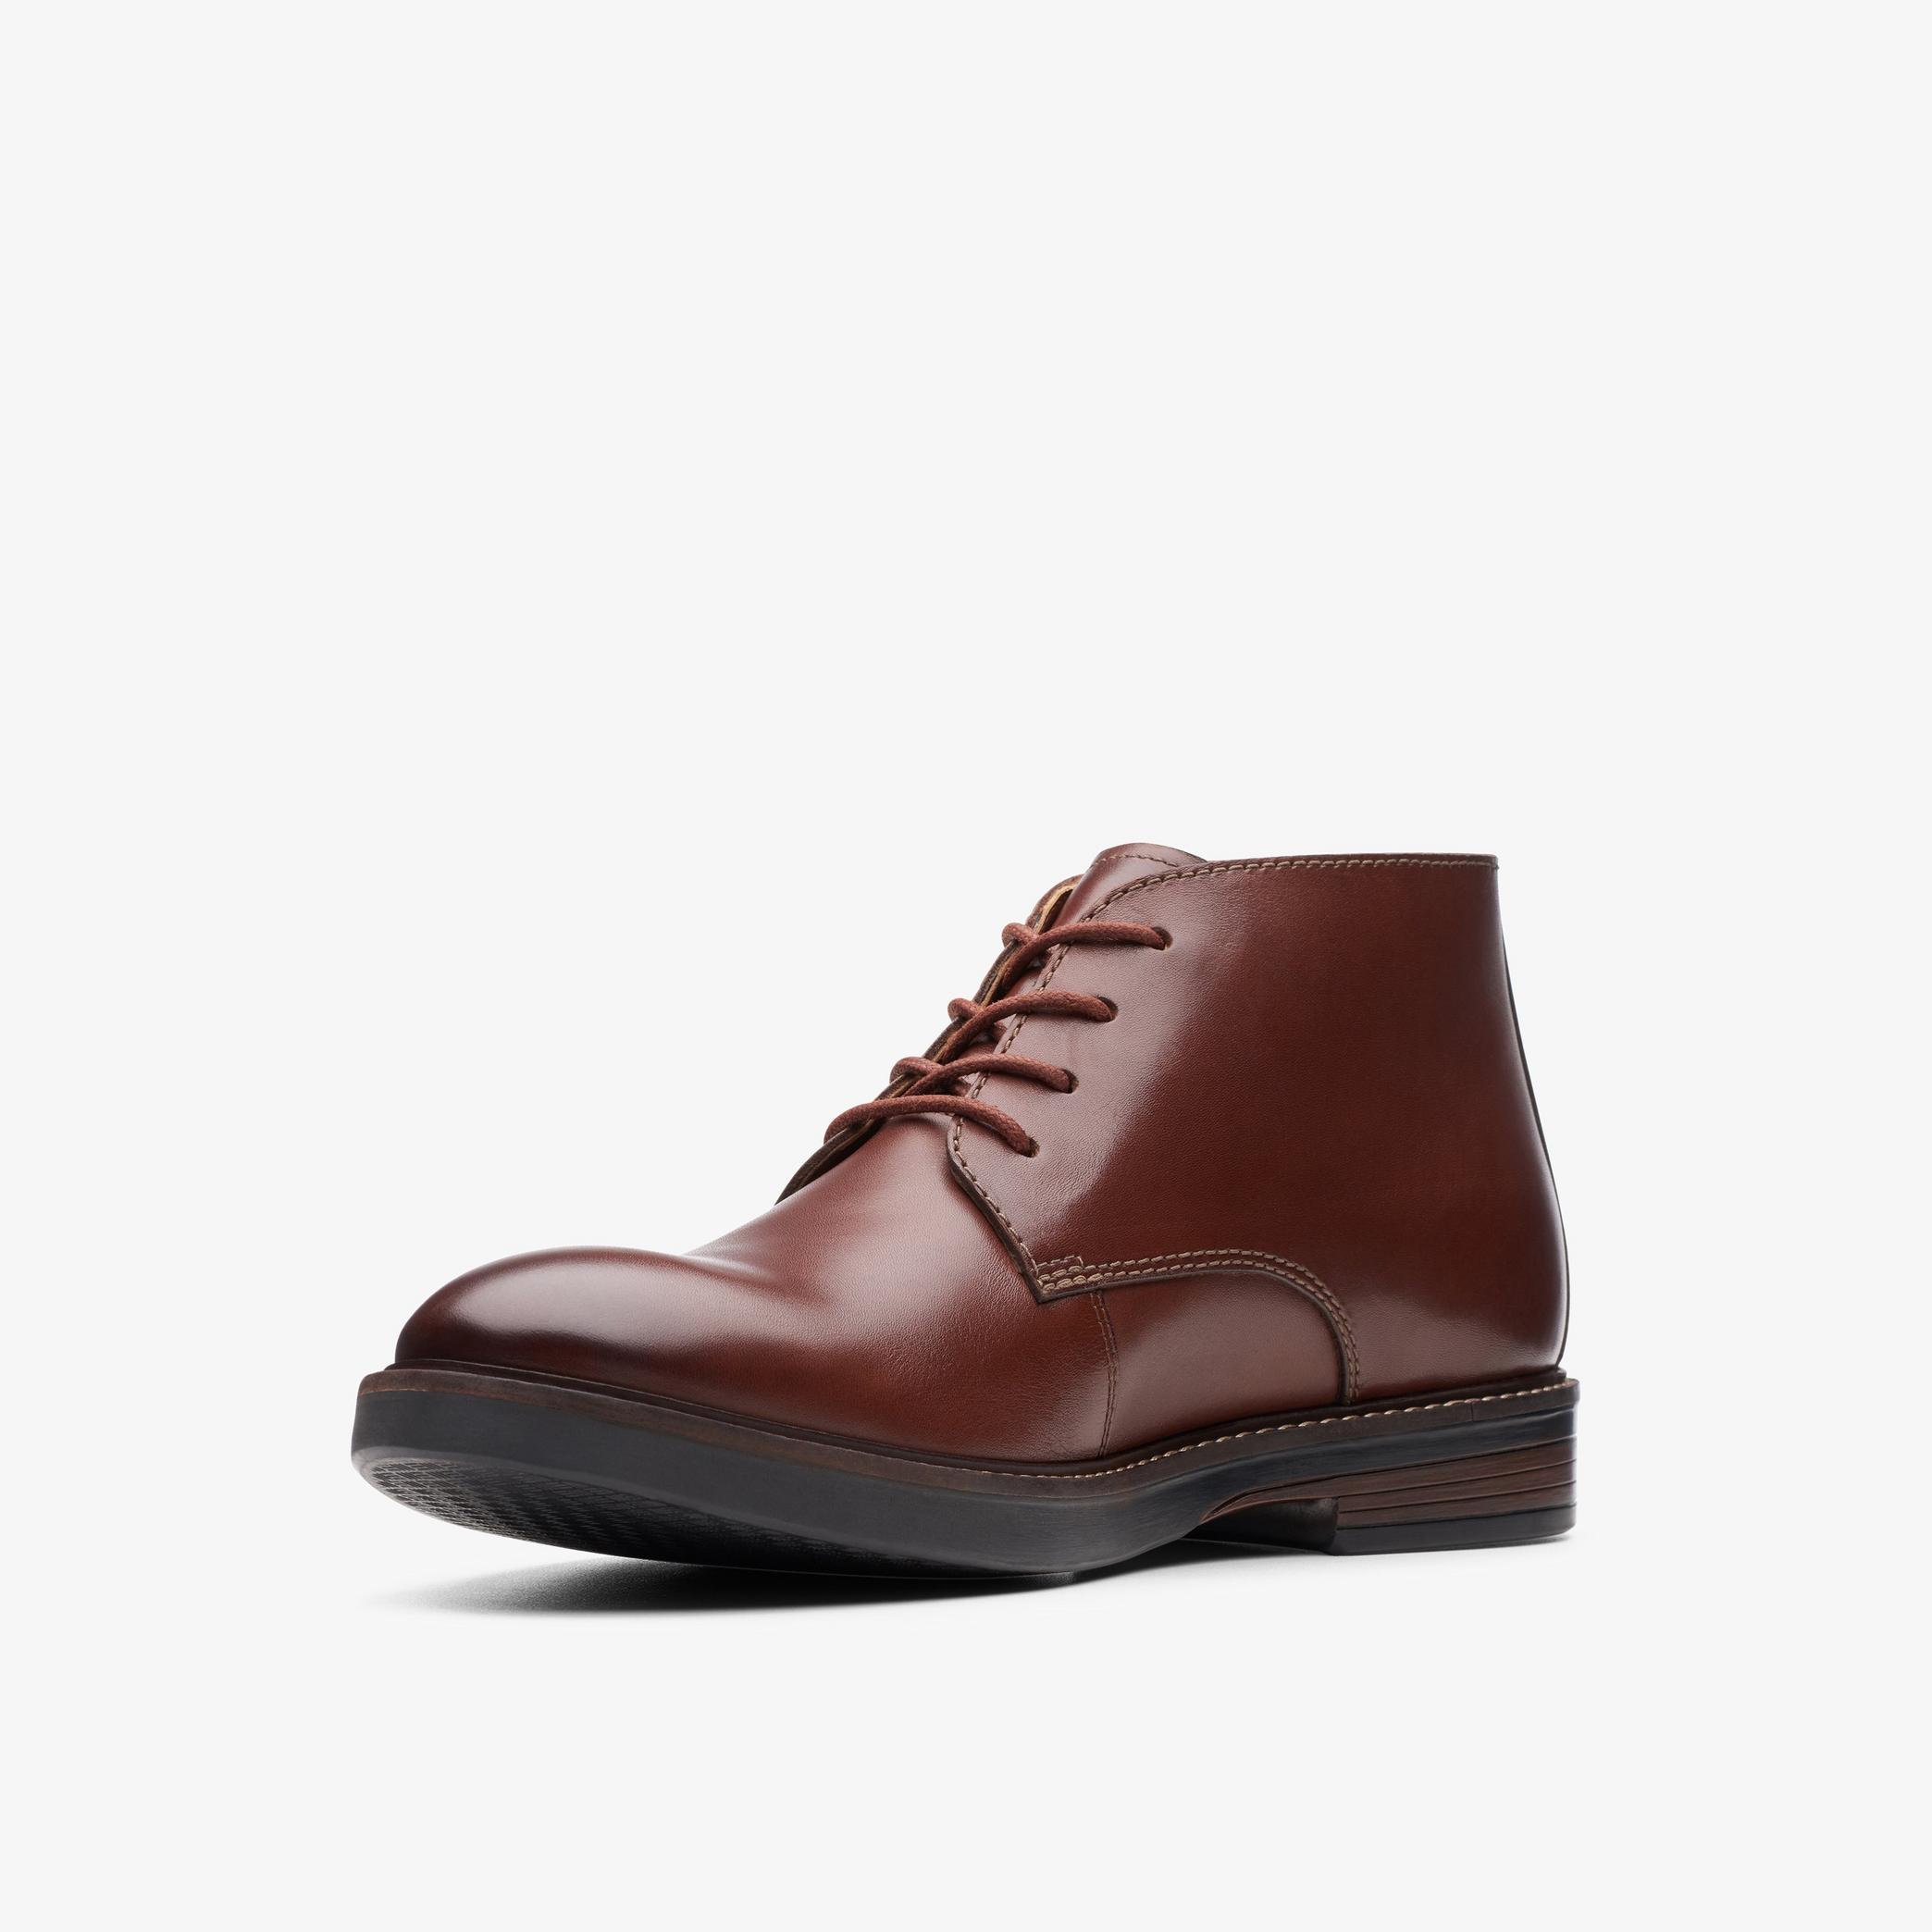 Paulson Mid Mahogany Leather Ankle Boots, view 4 of 6